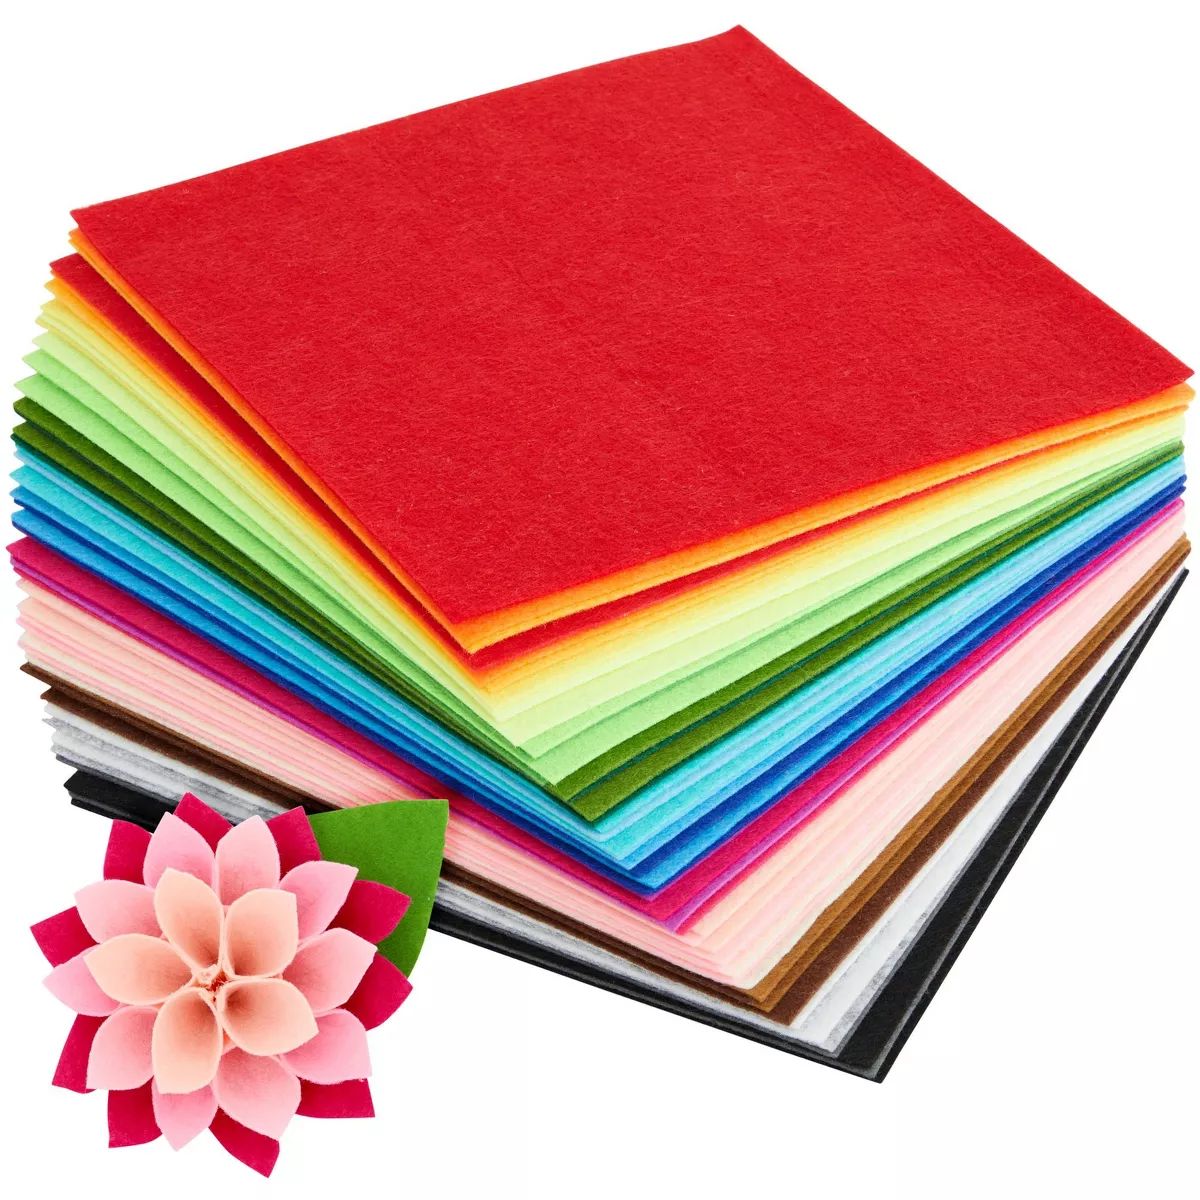 Juvale 50 Pack Felt Fabric Sheets for Crafts, Sewing, Party Decorations, 8x8" (20x20cm, 25 Rainbo... | Target